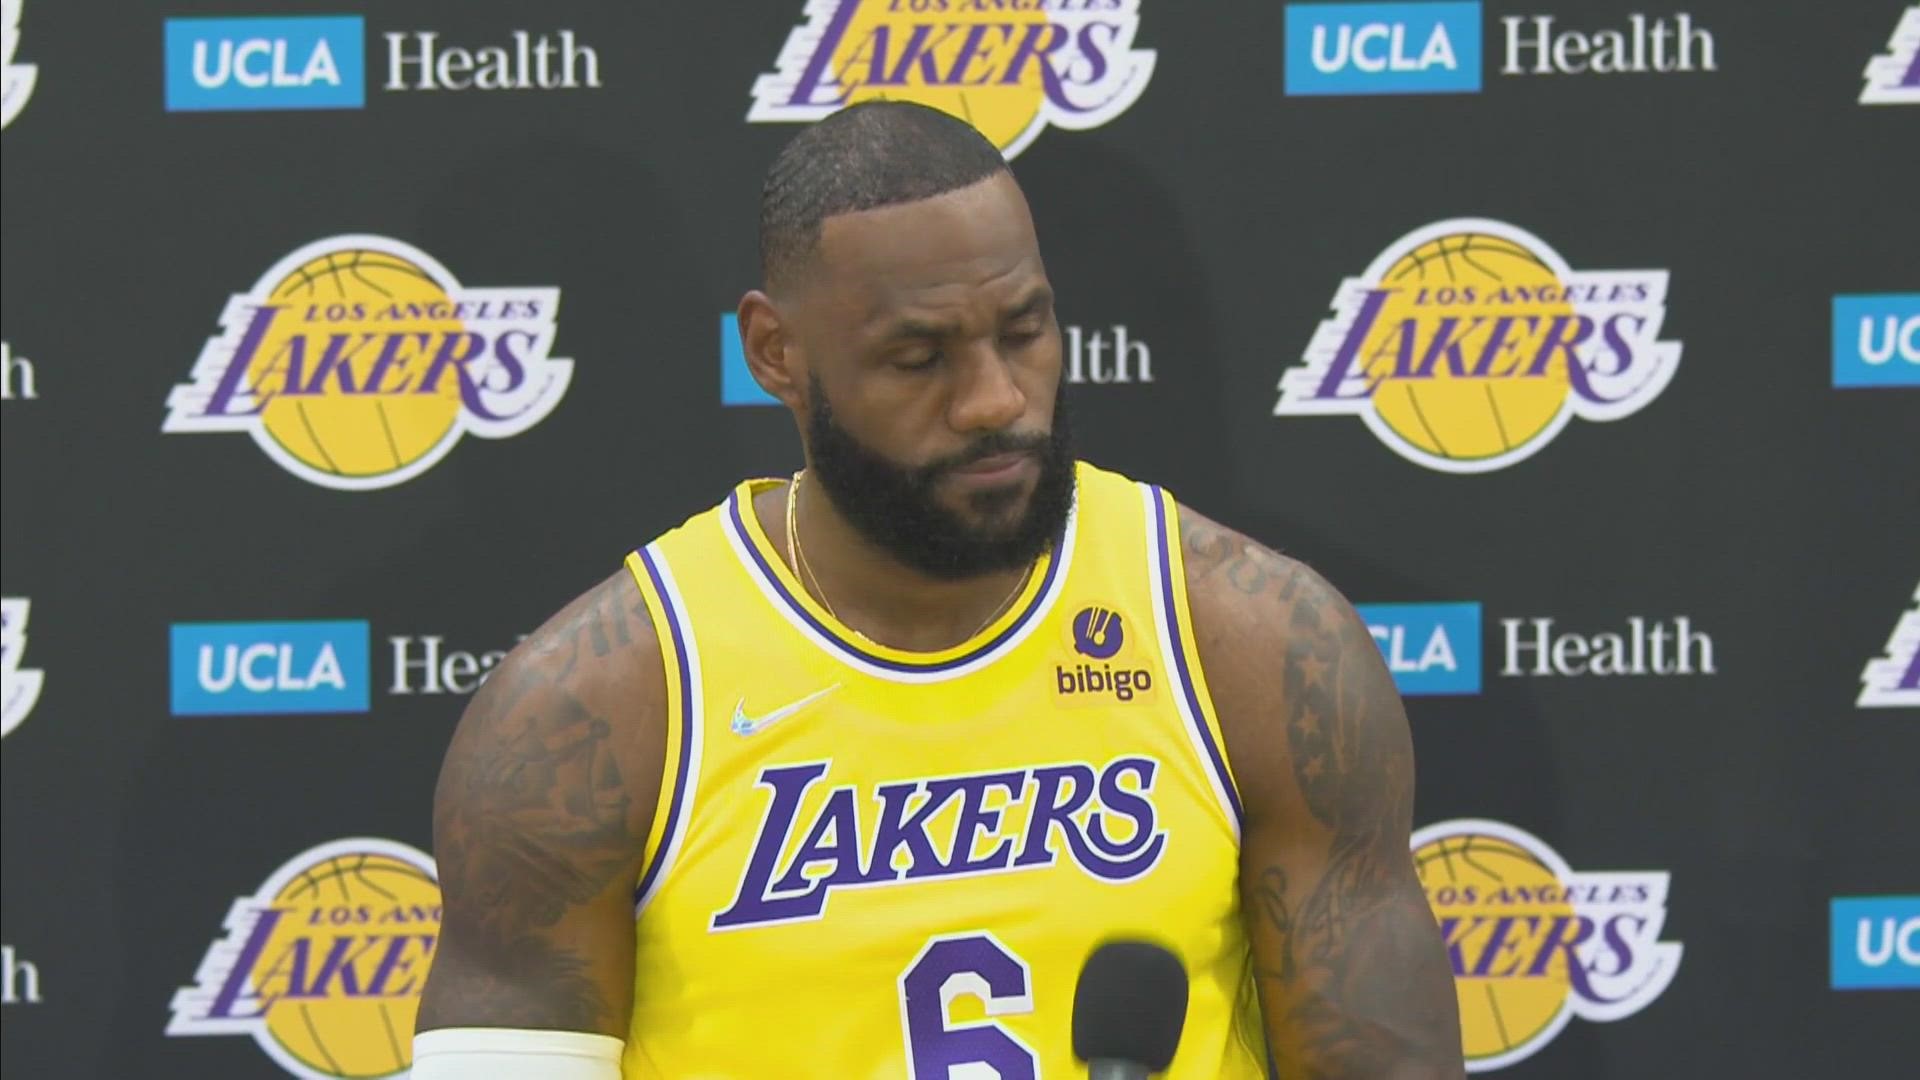 He confirmed his vaccination status during the Los Angeles Lakers media day on Tuesday.